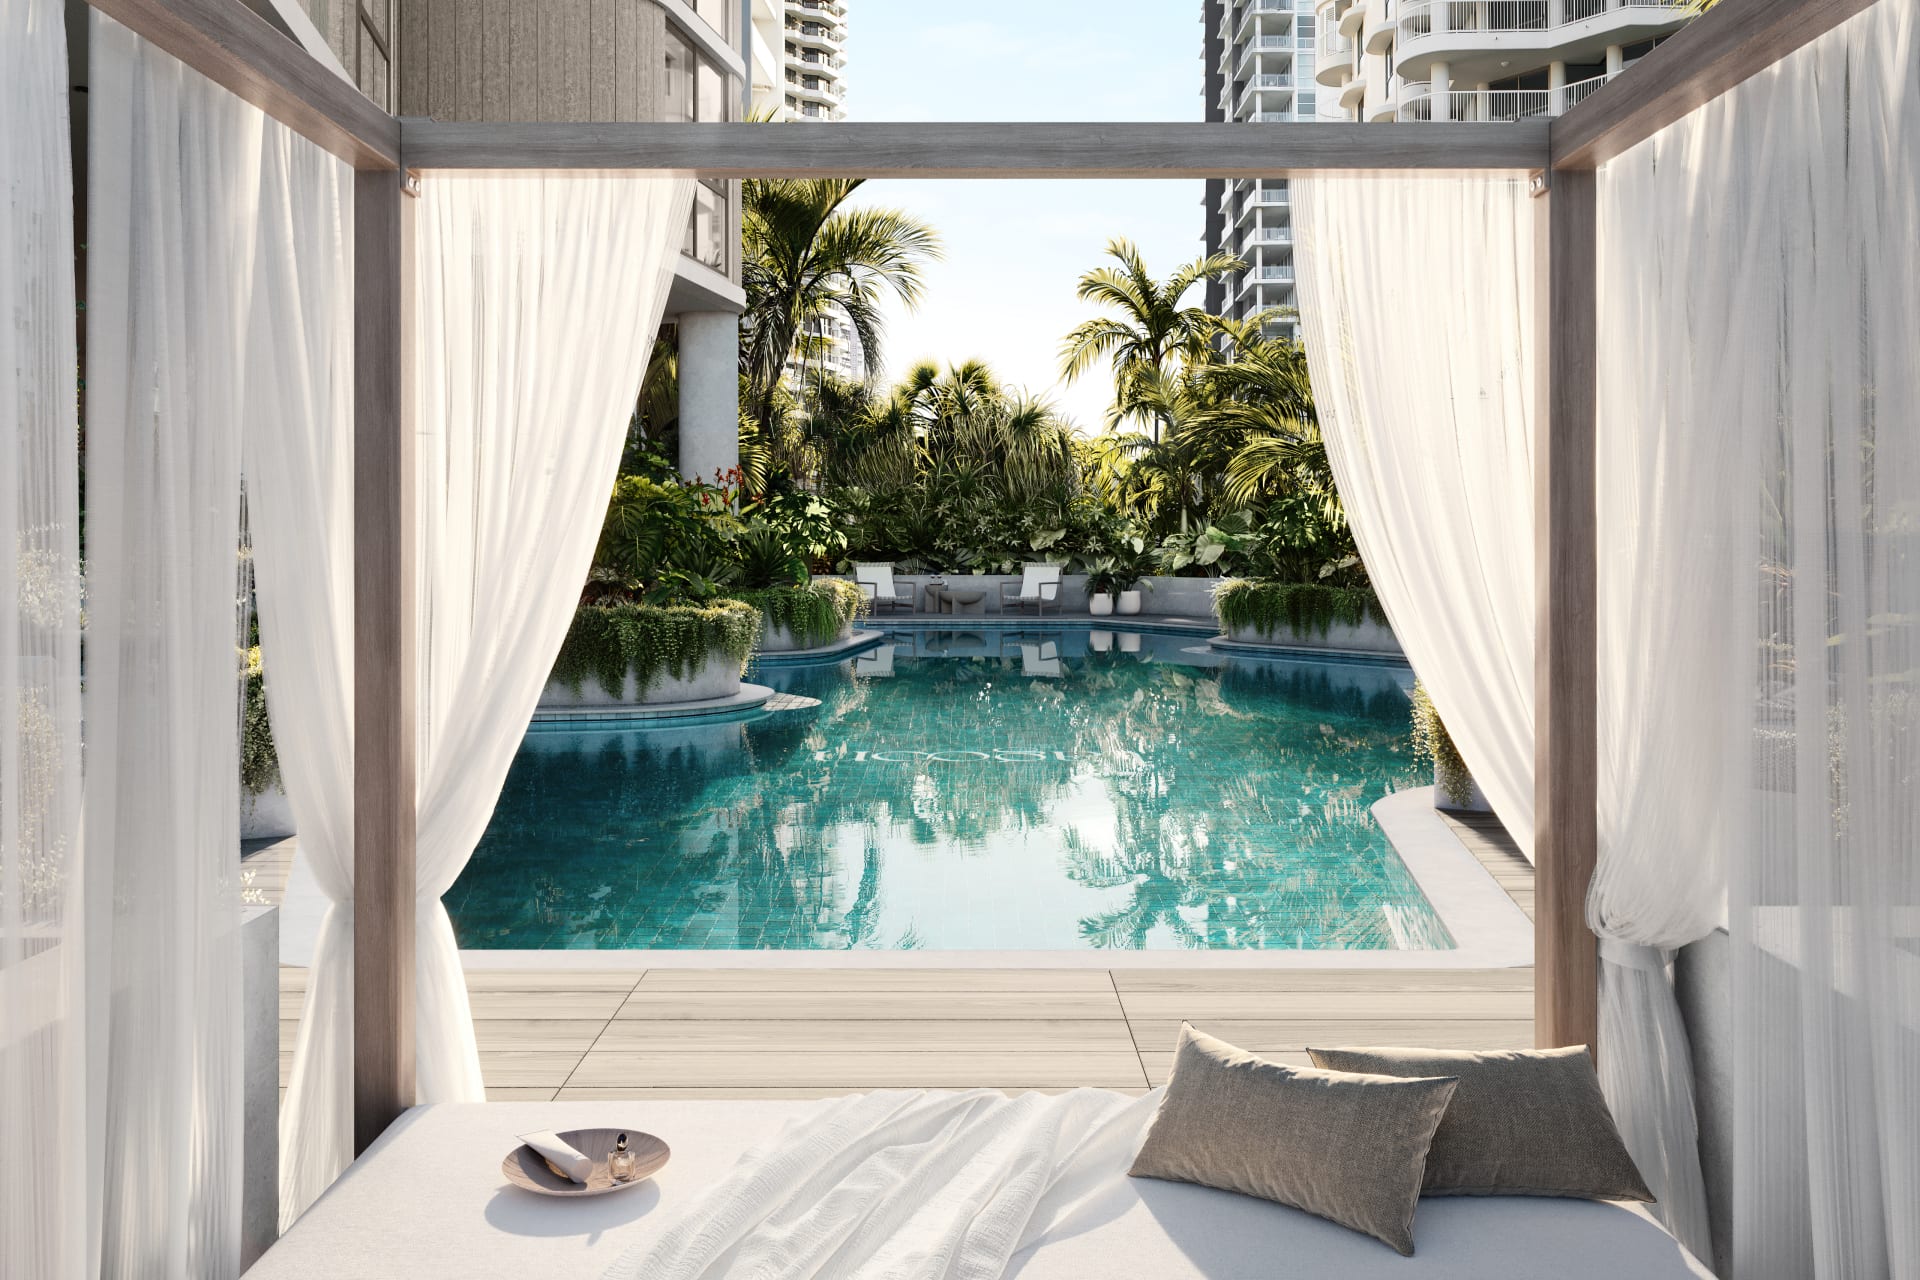 City Beat May 2023: How the Gold Coast unit market continues to hold firm following COVID boom